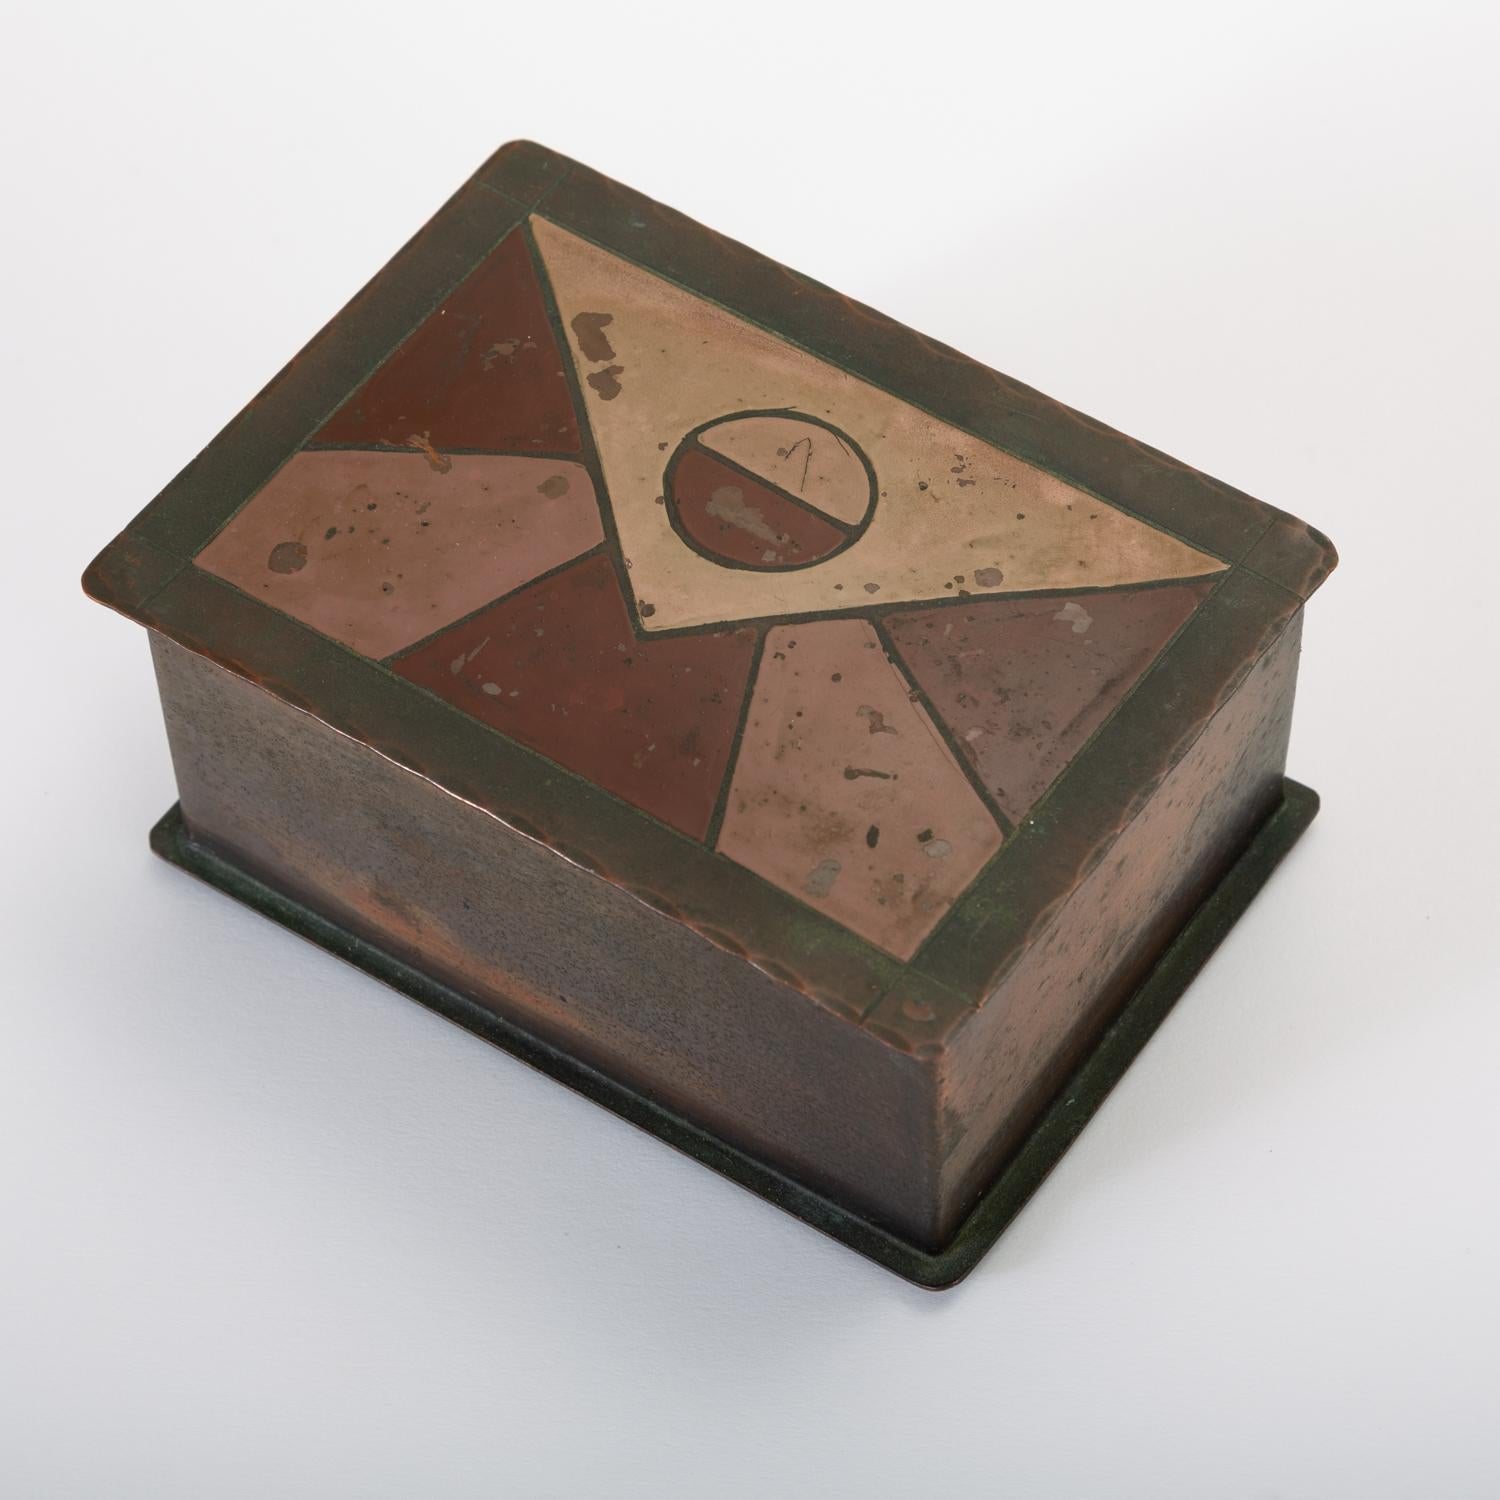 A California-made modern jewelry or decorative box with a painted lid from Laguna Beach workshop Craftsman Studios. Interior is laminated with a thin redwood lining. Stamped by manufacturer on underside. 

Condition: Good original condition; brass